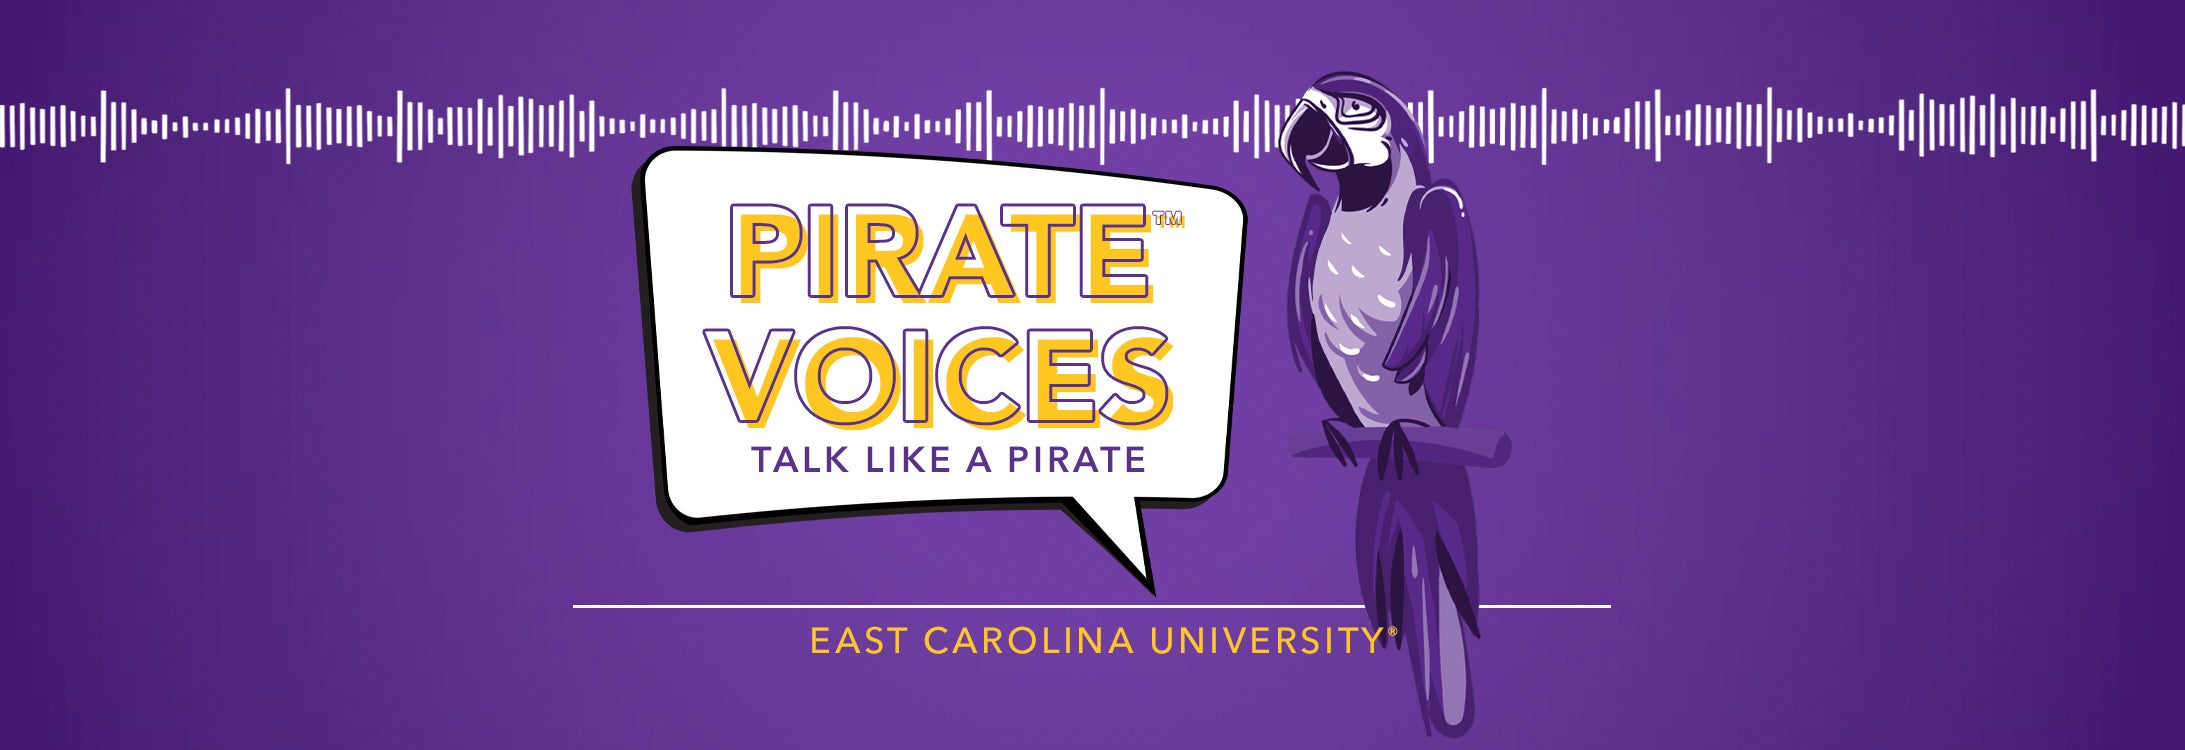 Pirate Voices, a Talk Like a Pirate series